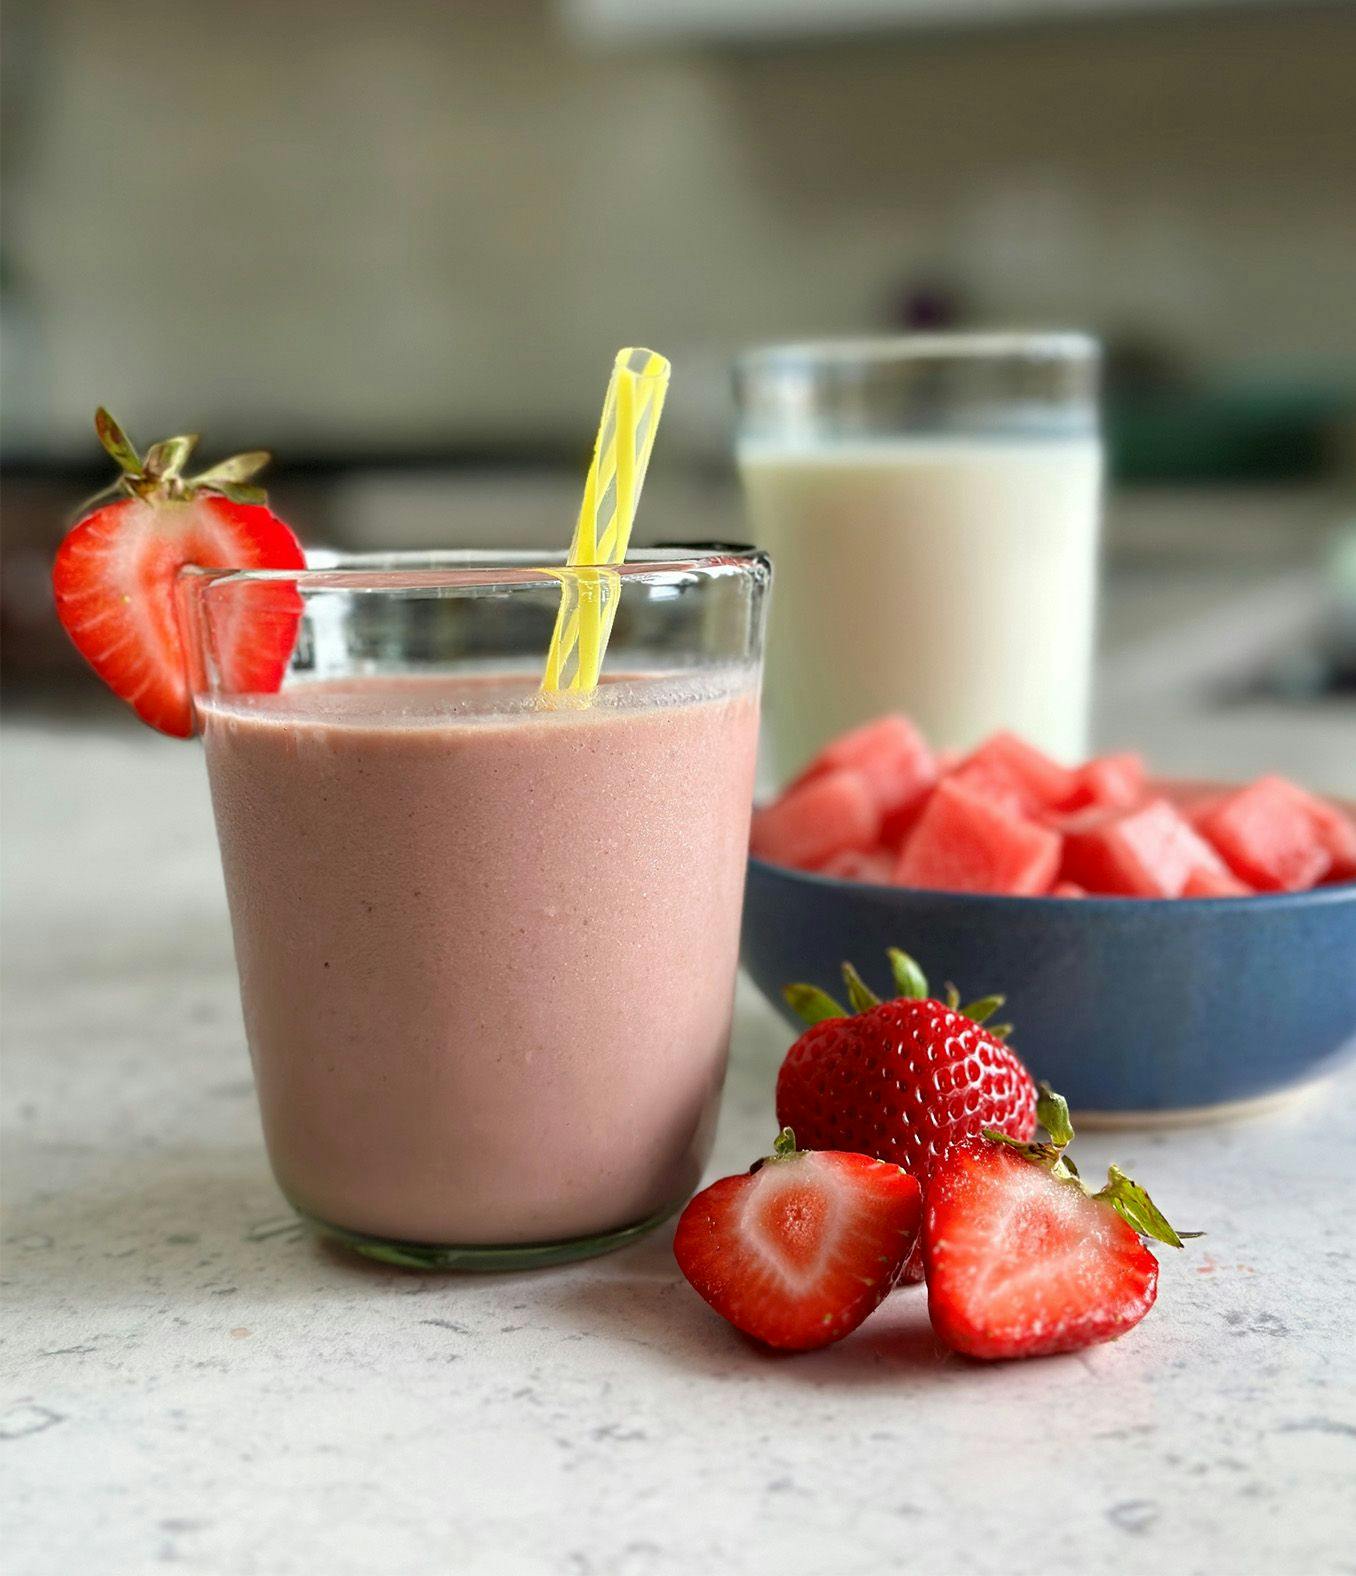 Smoothie with a yellow straw and a strawberry garnish sitting next to a bowl of watermelon. 